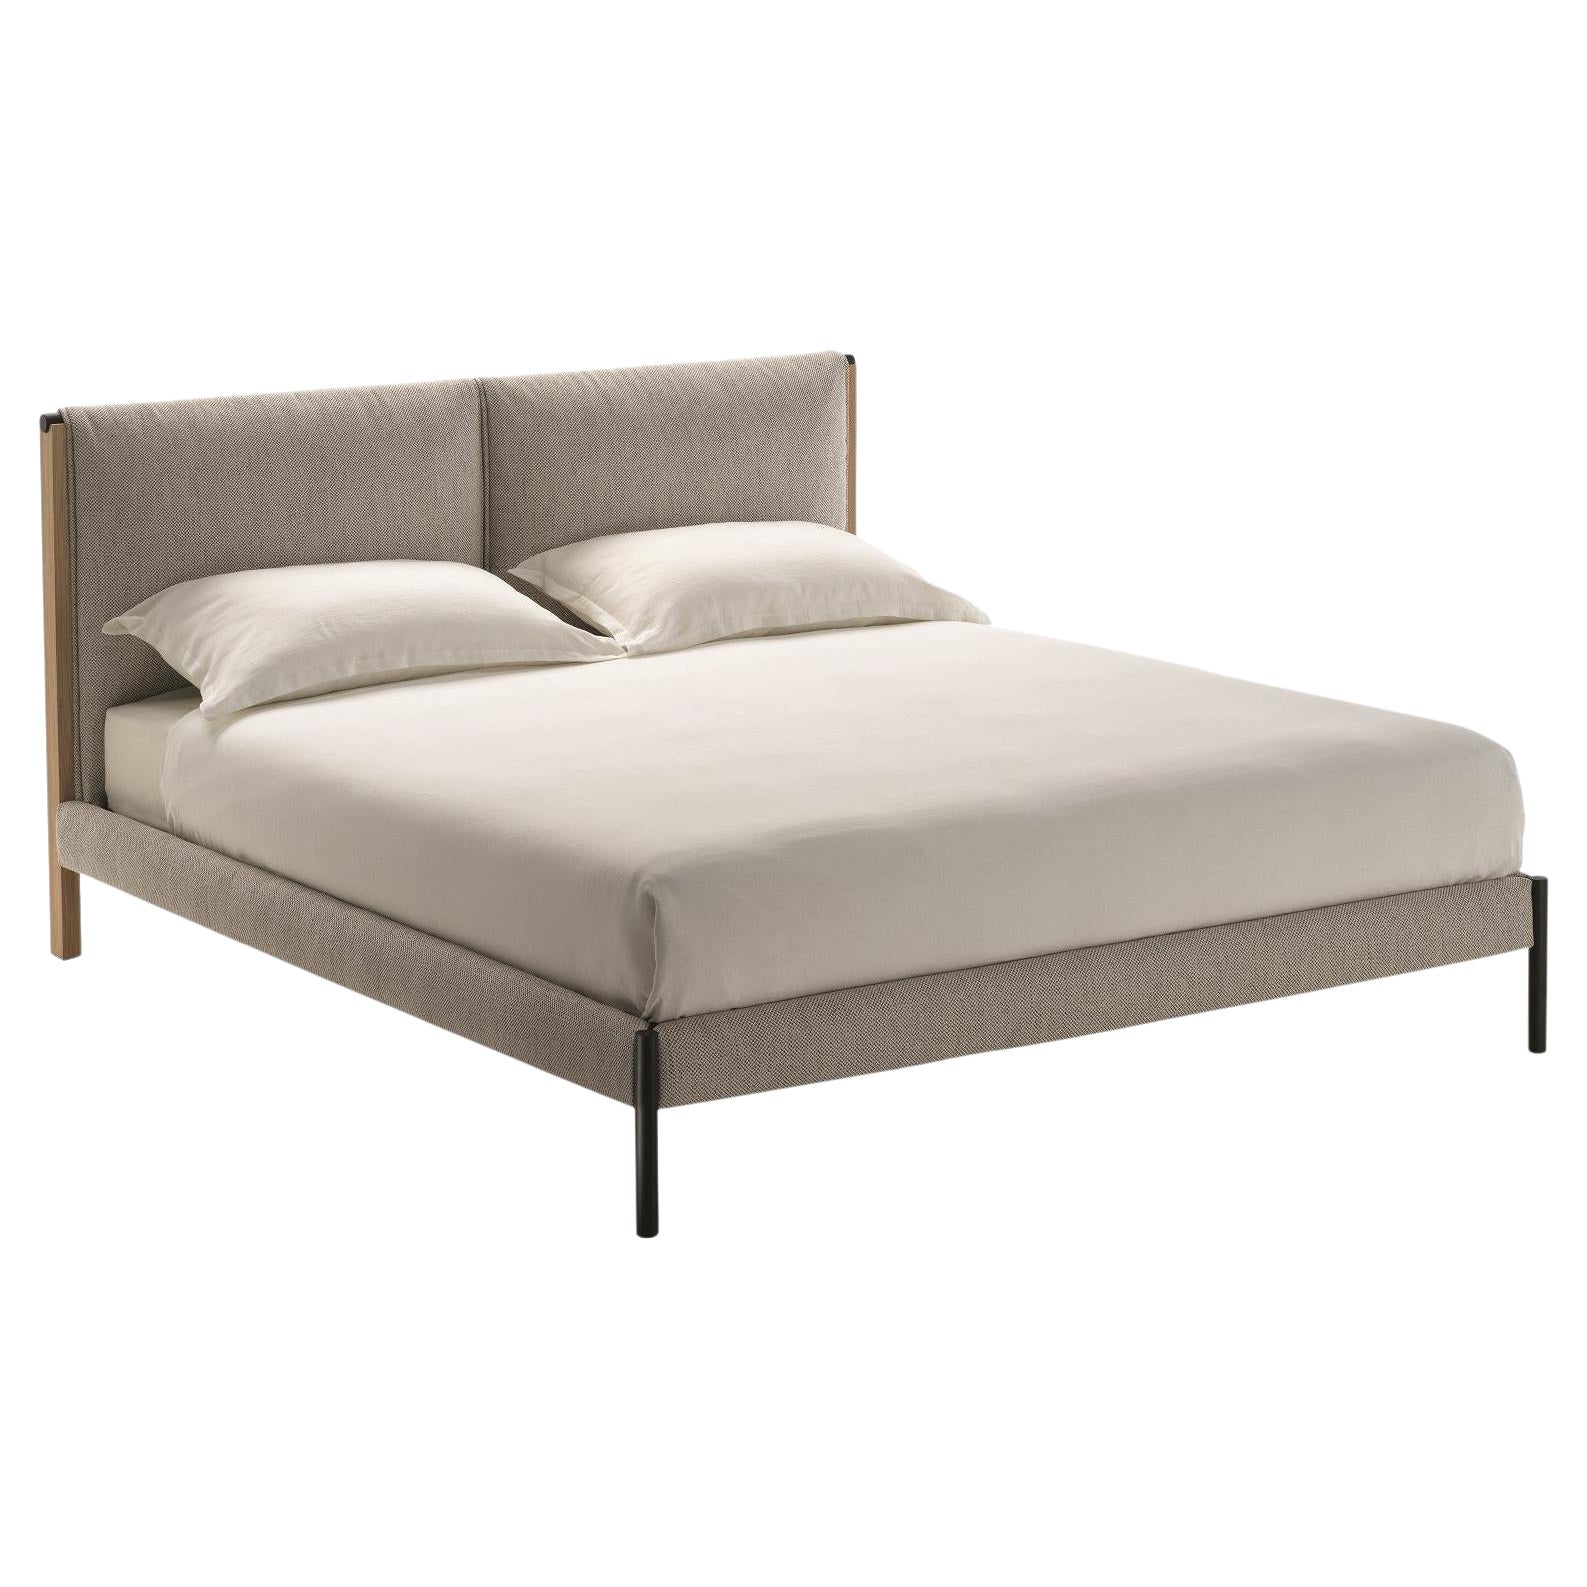 Zanotta King Size Ricordi Bed with Single Springing in Toce Upholstery For Sale